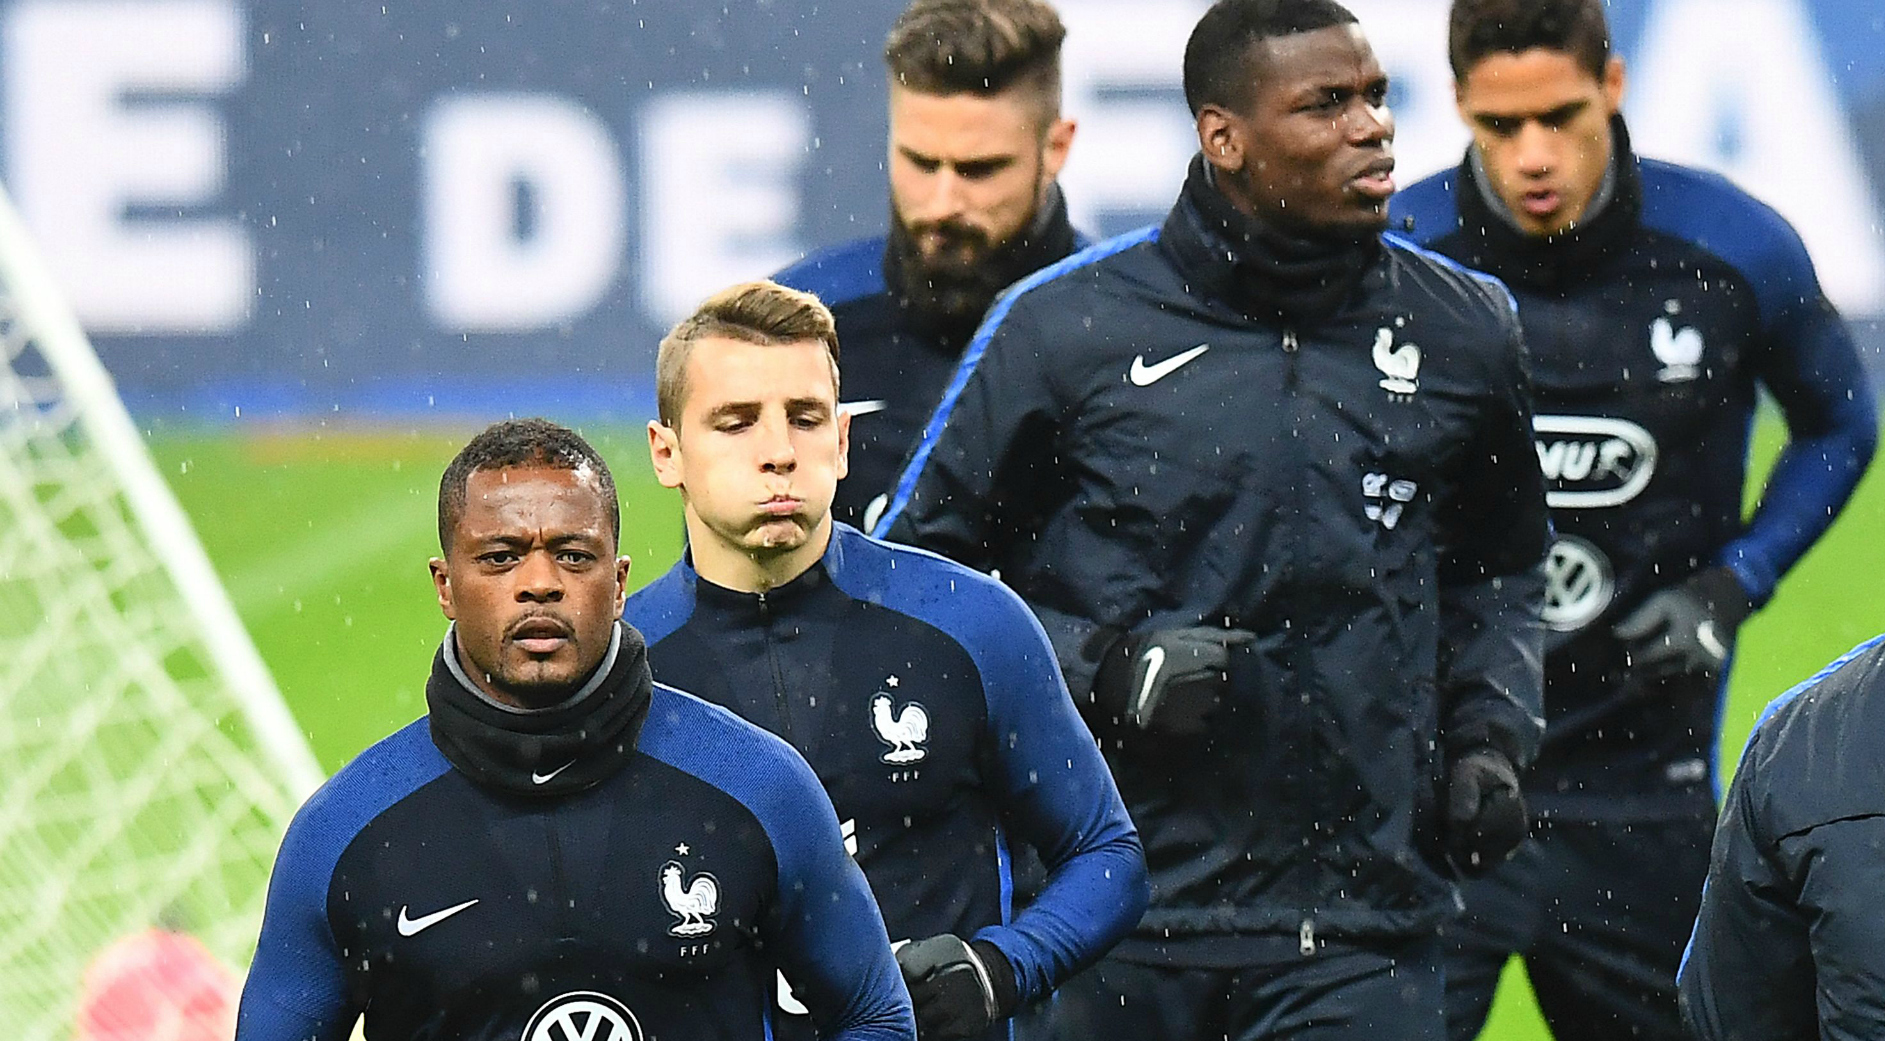 'Le Graet should be fired' - Claims French football is free of racism are nonsense, says Evra